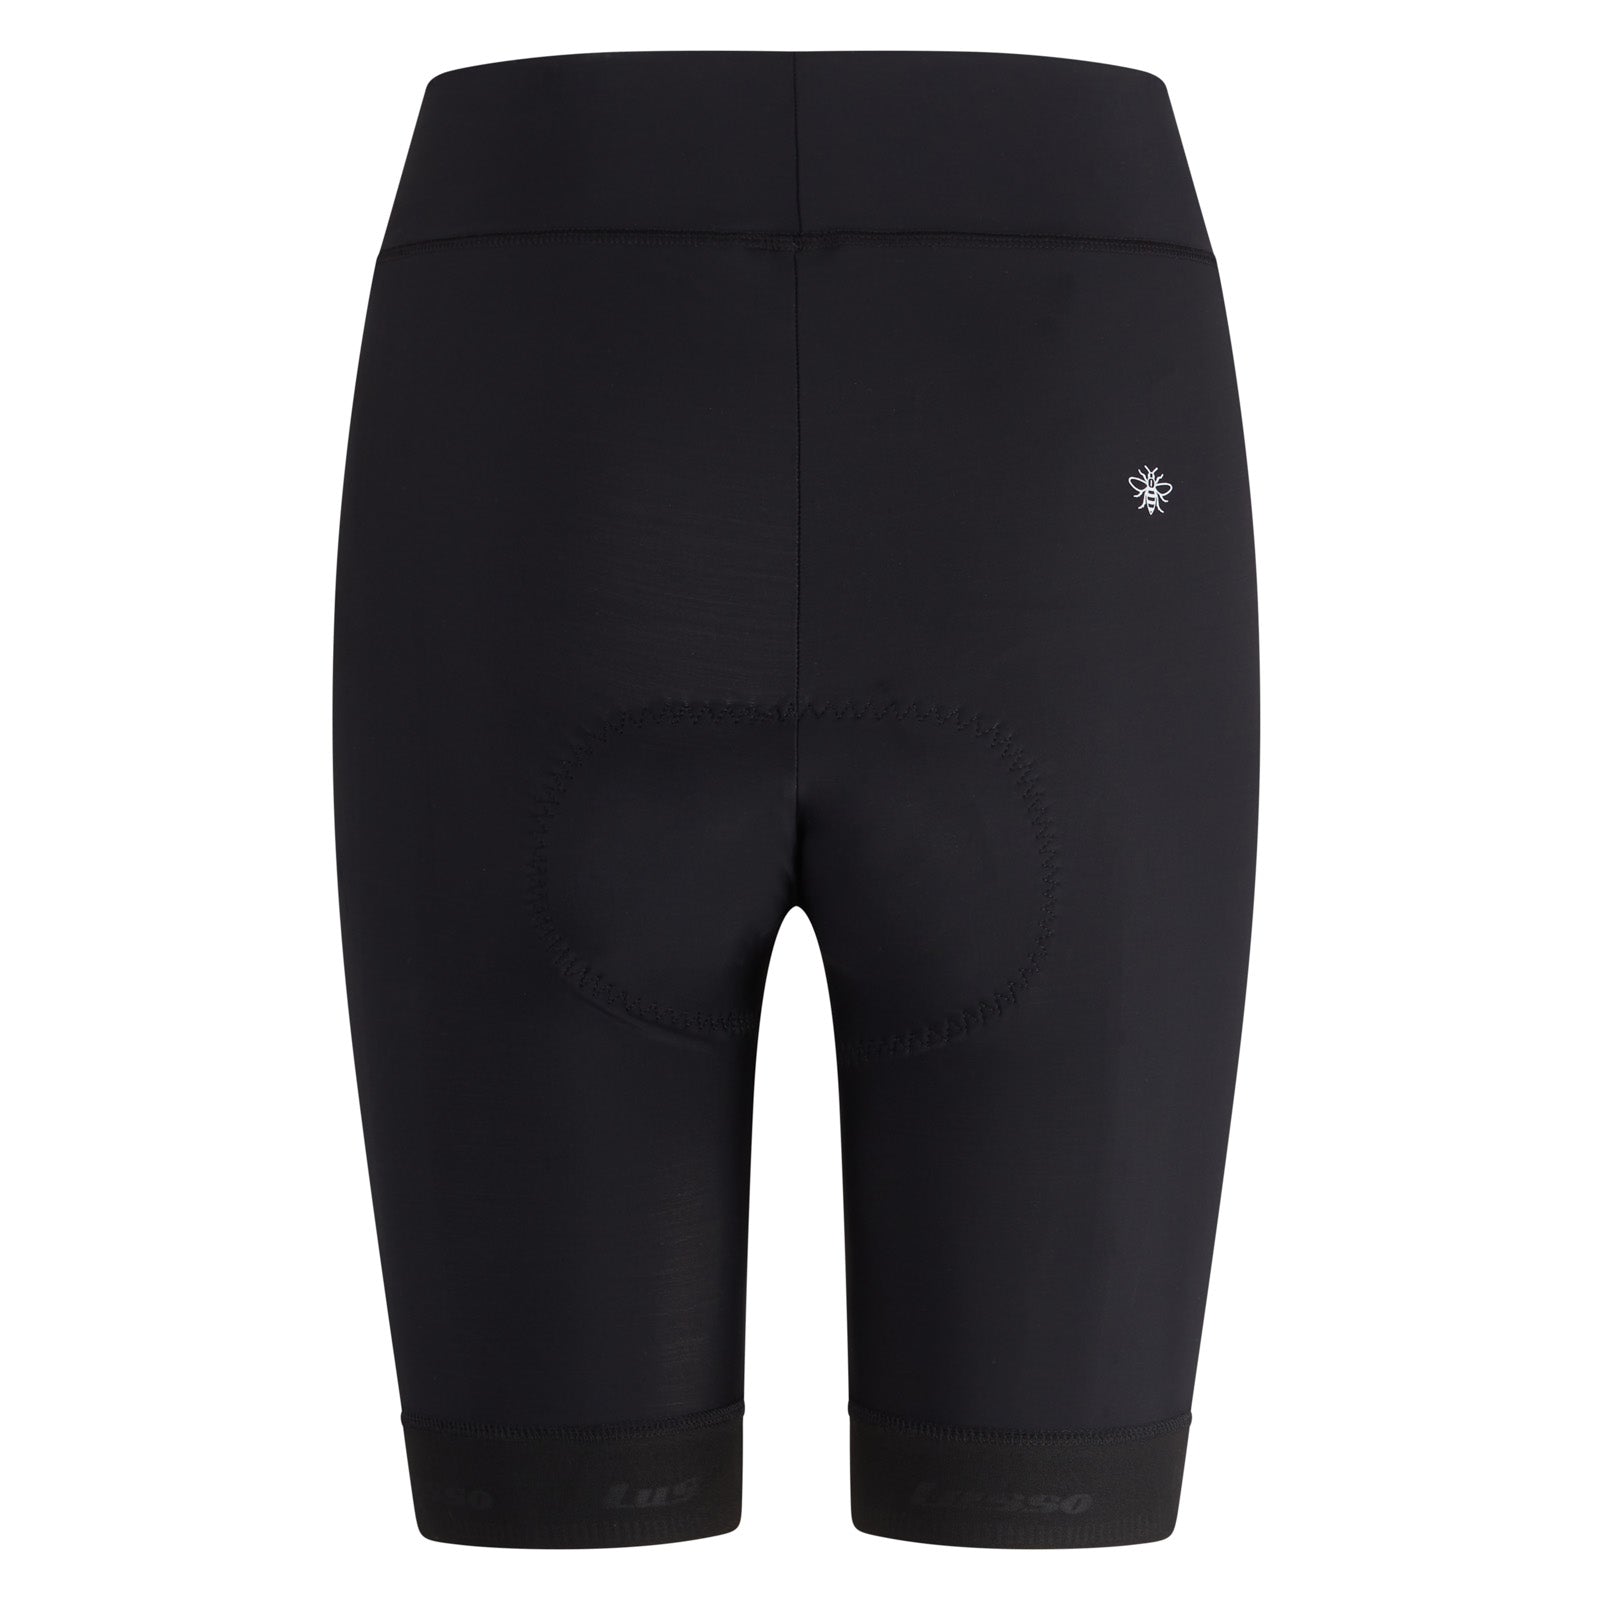 Women's Primary Shorts - Lusso Cycle Wear